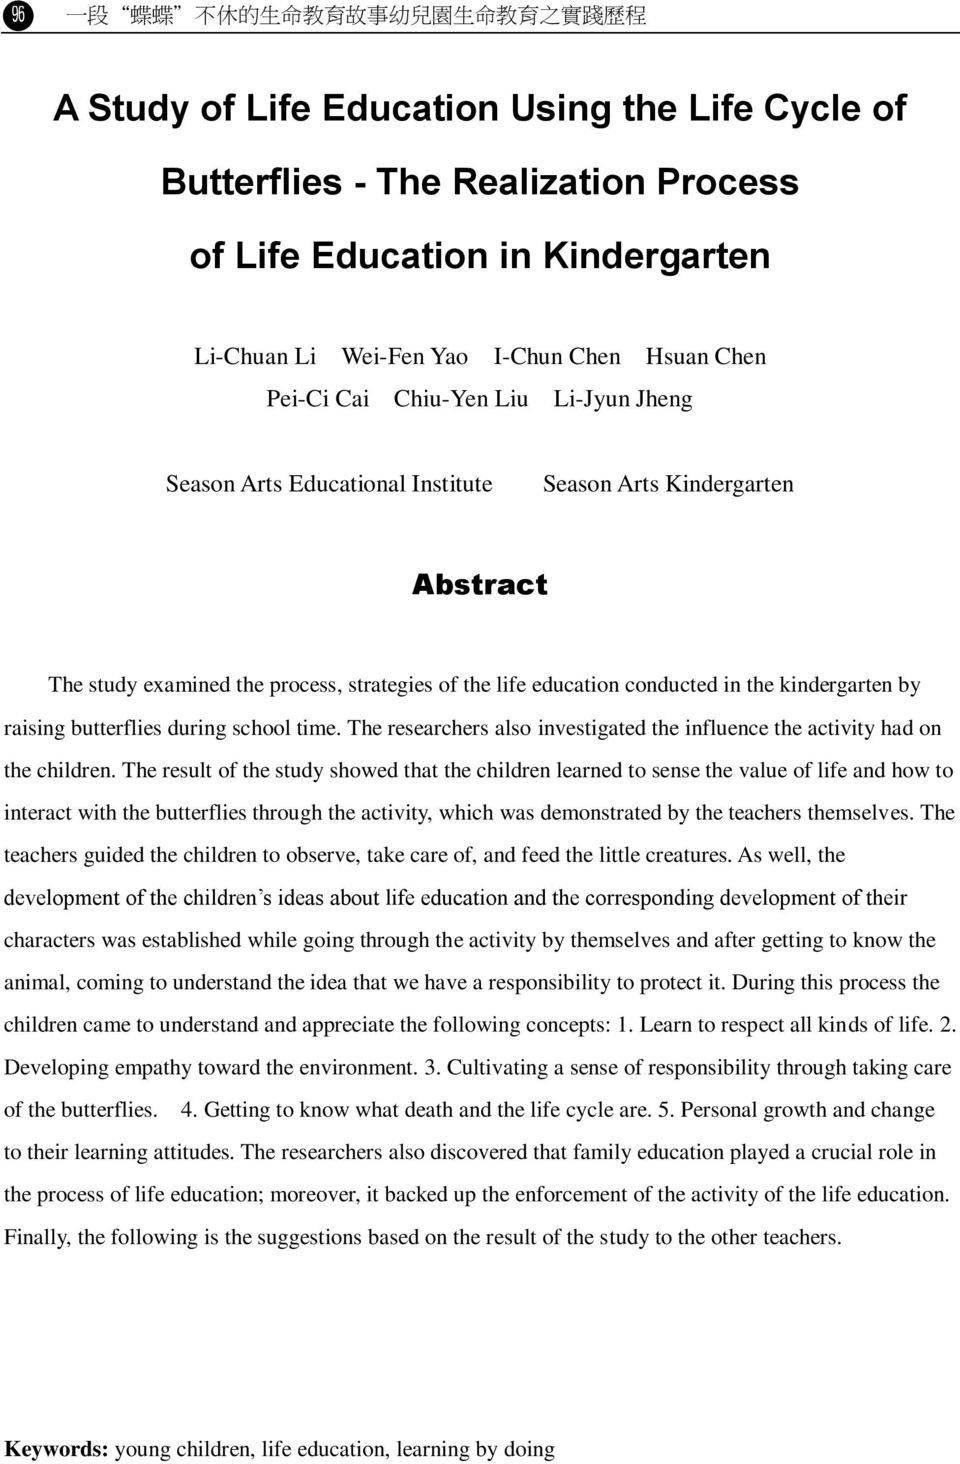 conducted in the kindergarten by raising butterflies during school time. The researchers also investigated the influence the activity had on the children.